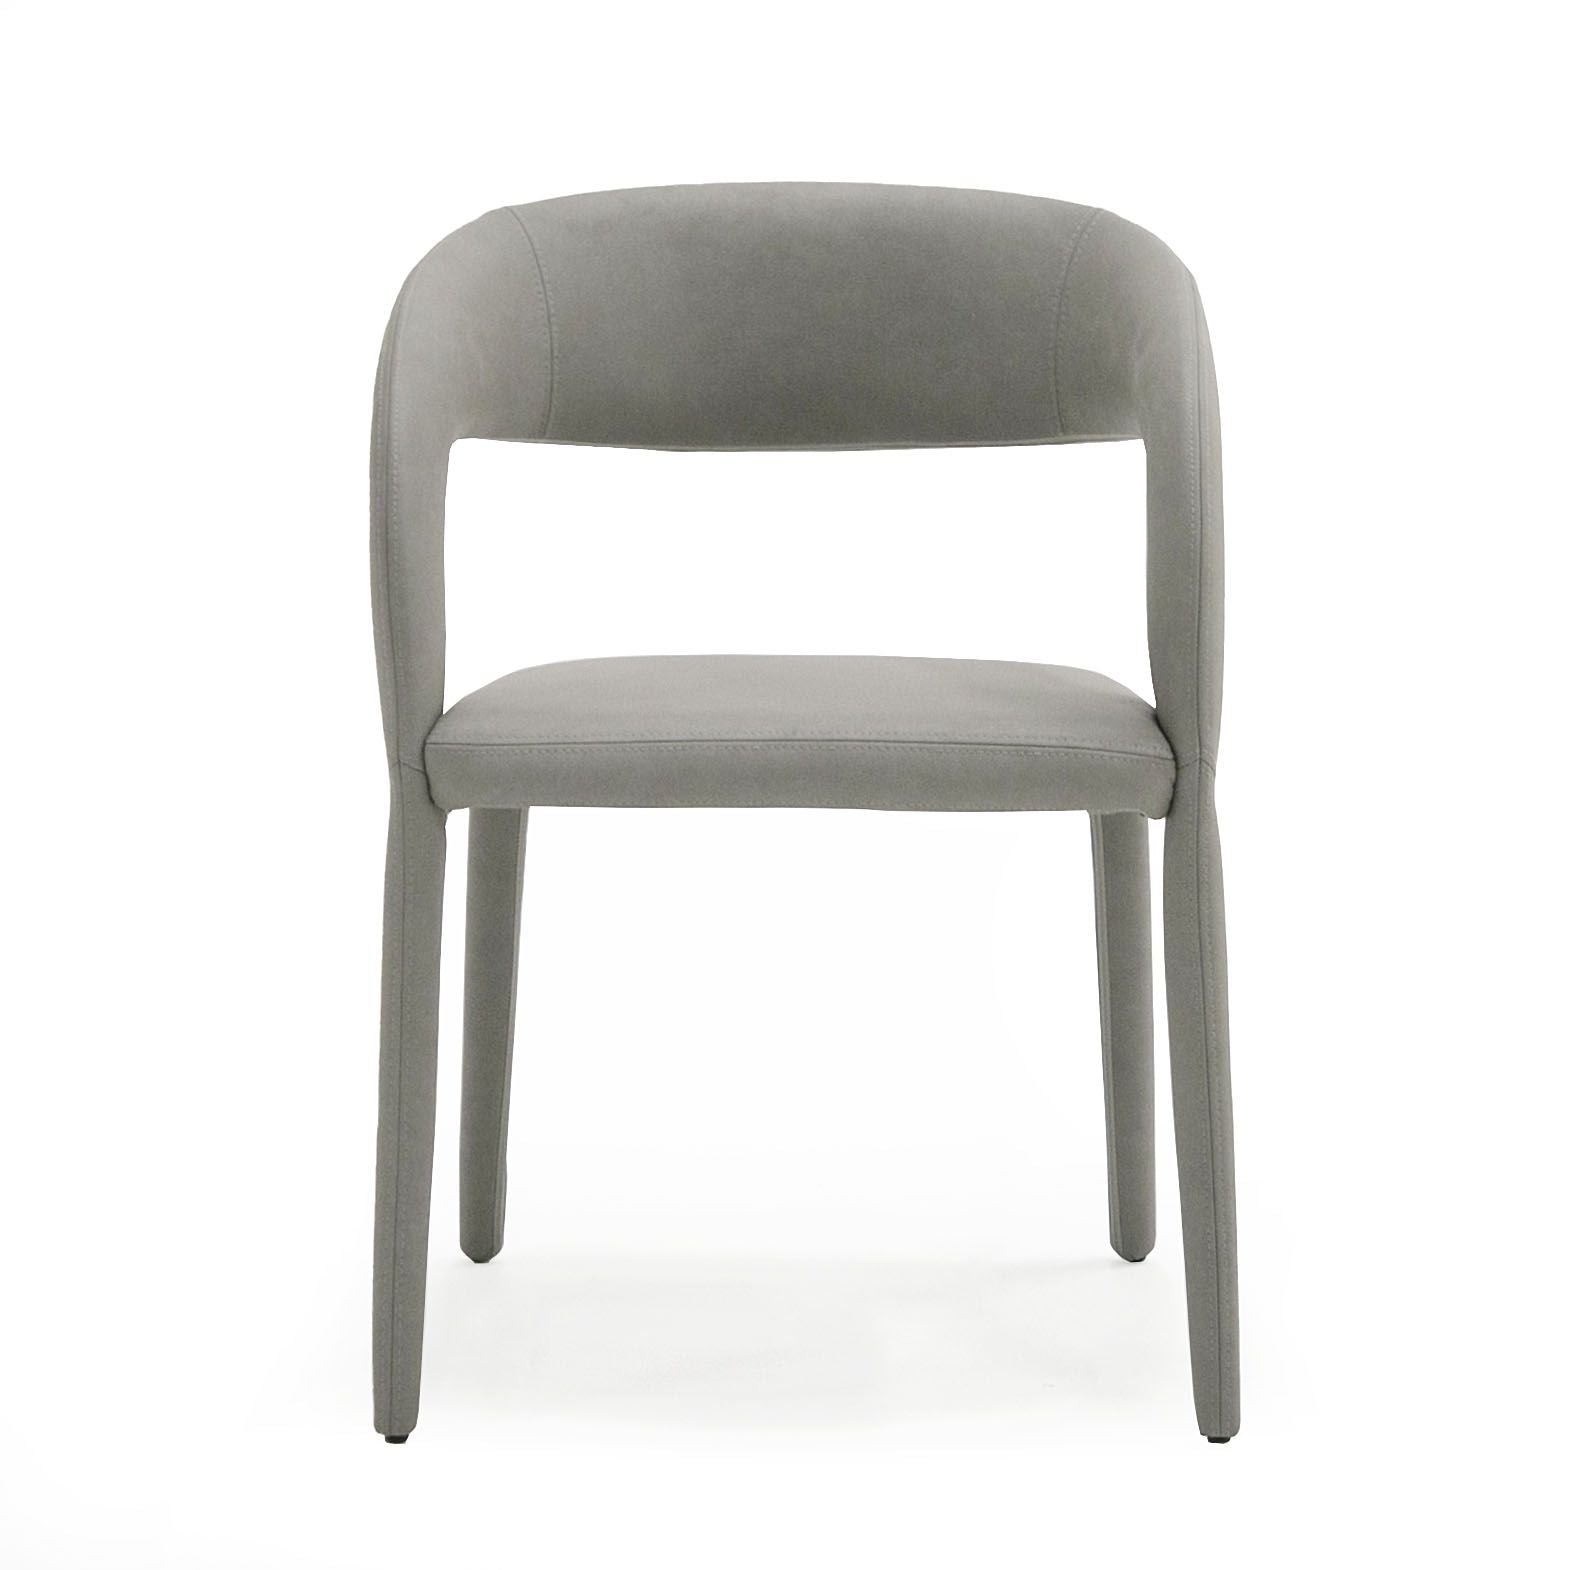 VIG Furniture Dining Chairs Modrest Mundra - Modern Grey Leatherette Dining Chair